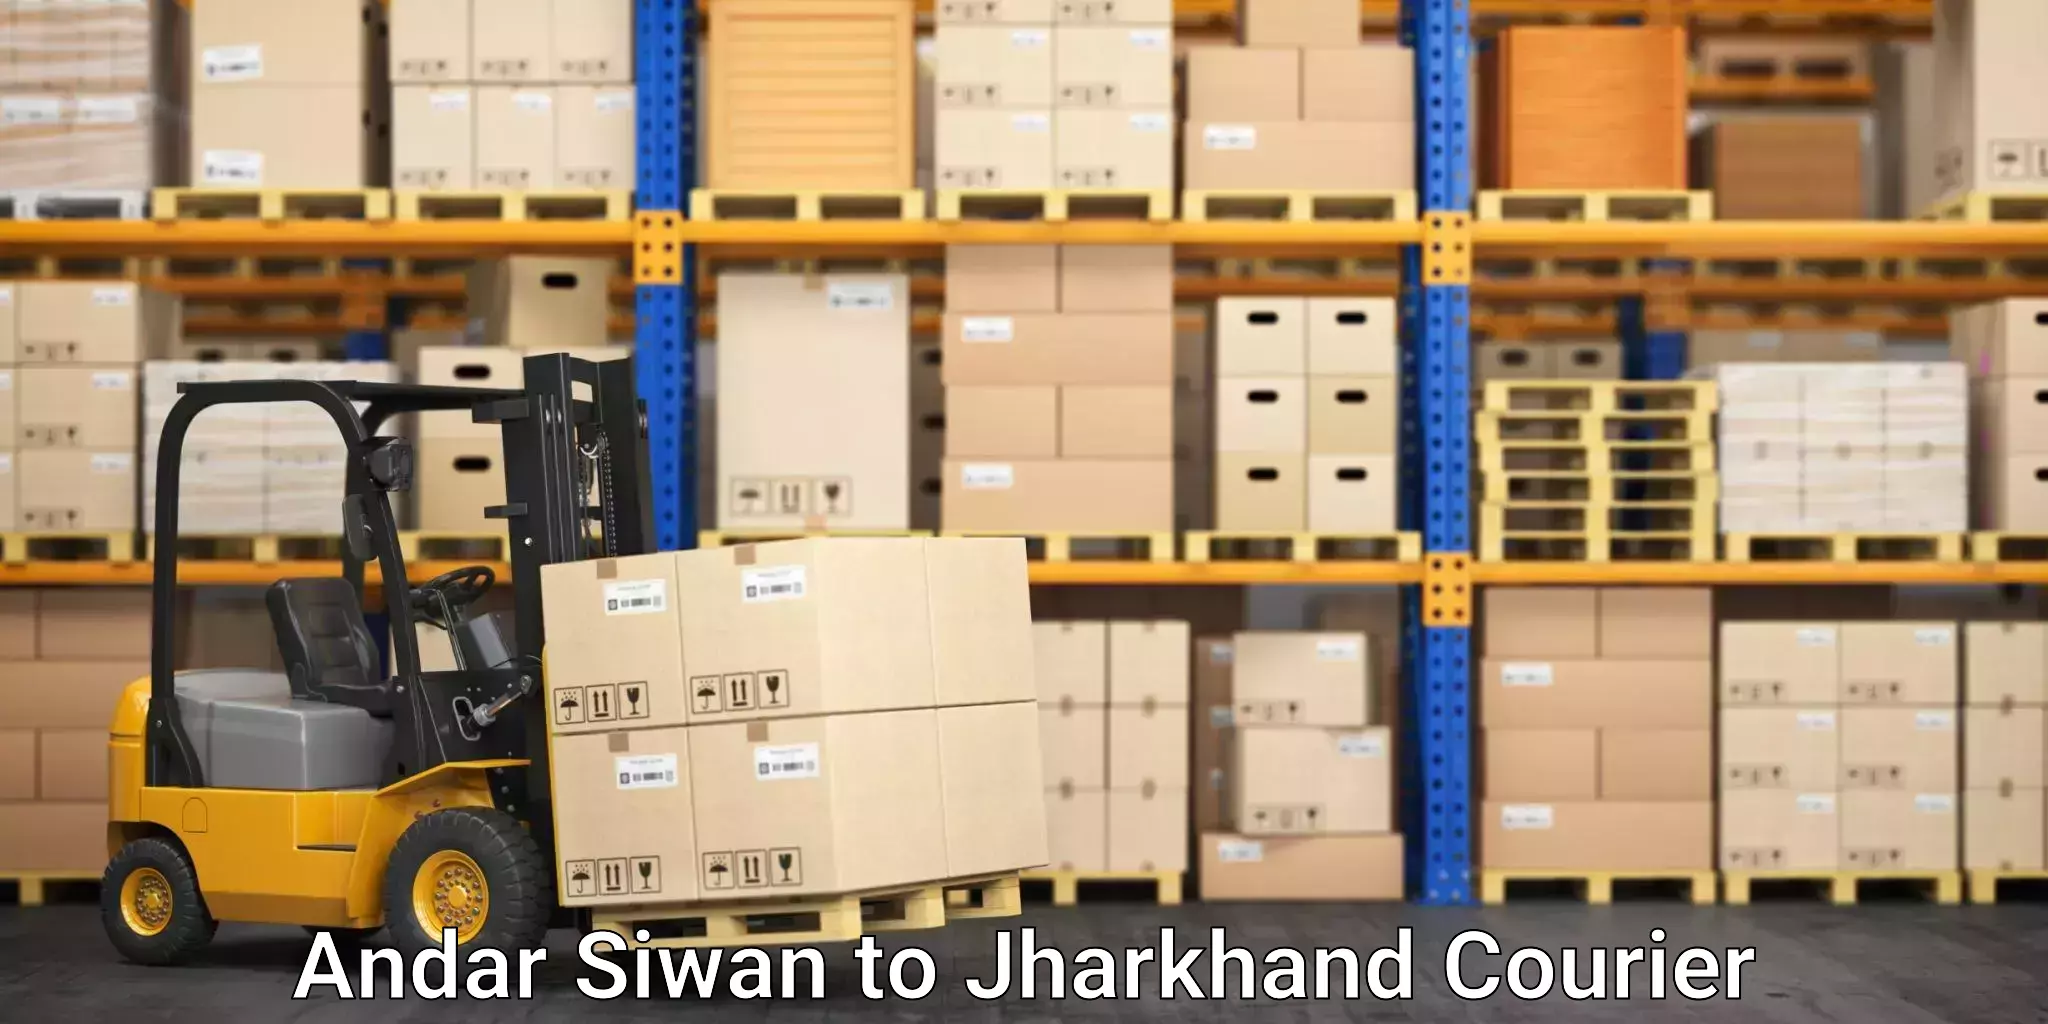 Stress-free furniture moving Andar Siwan to Jharkhand